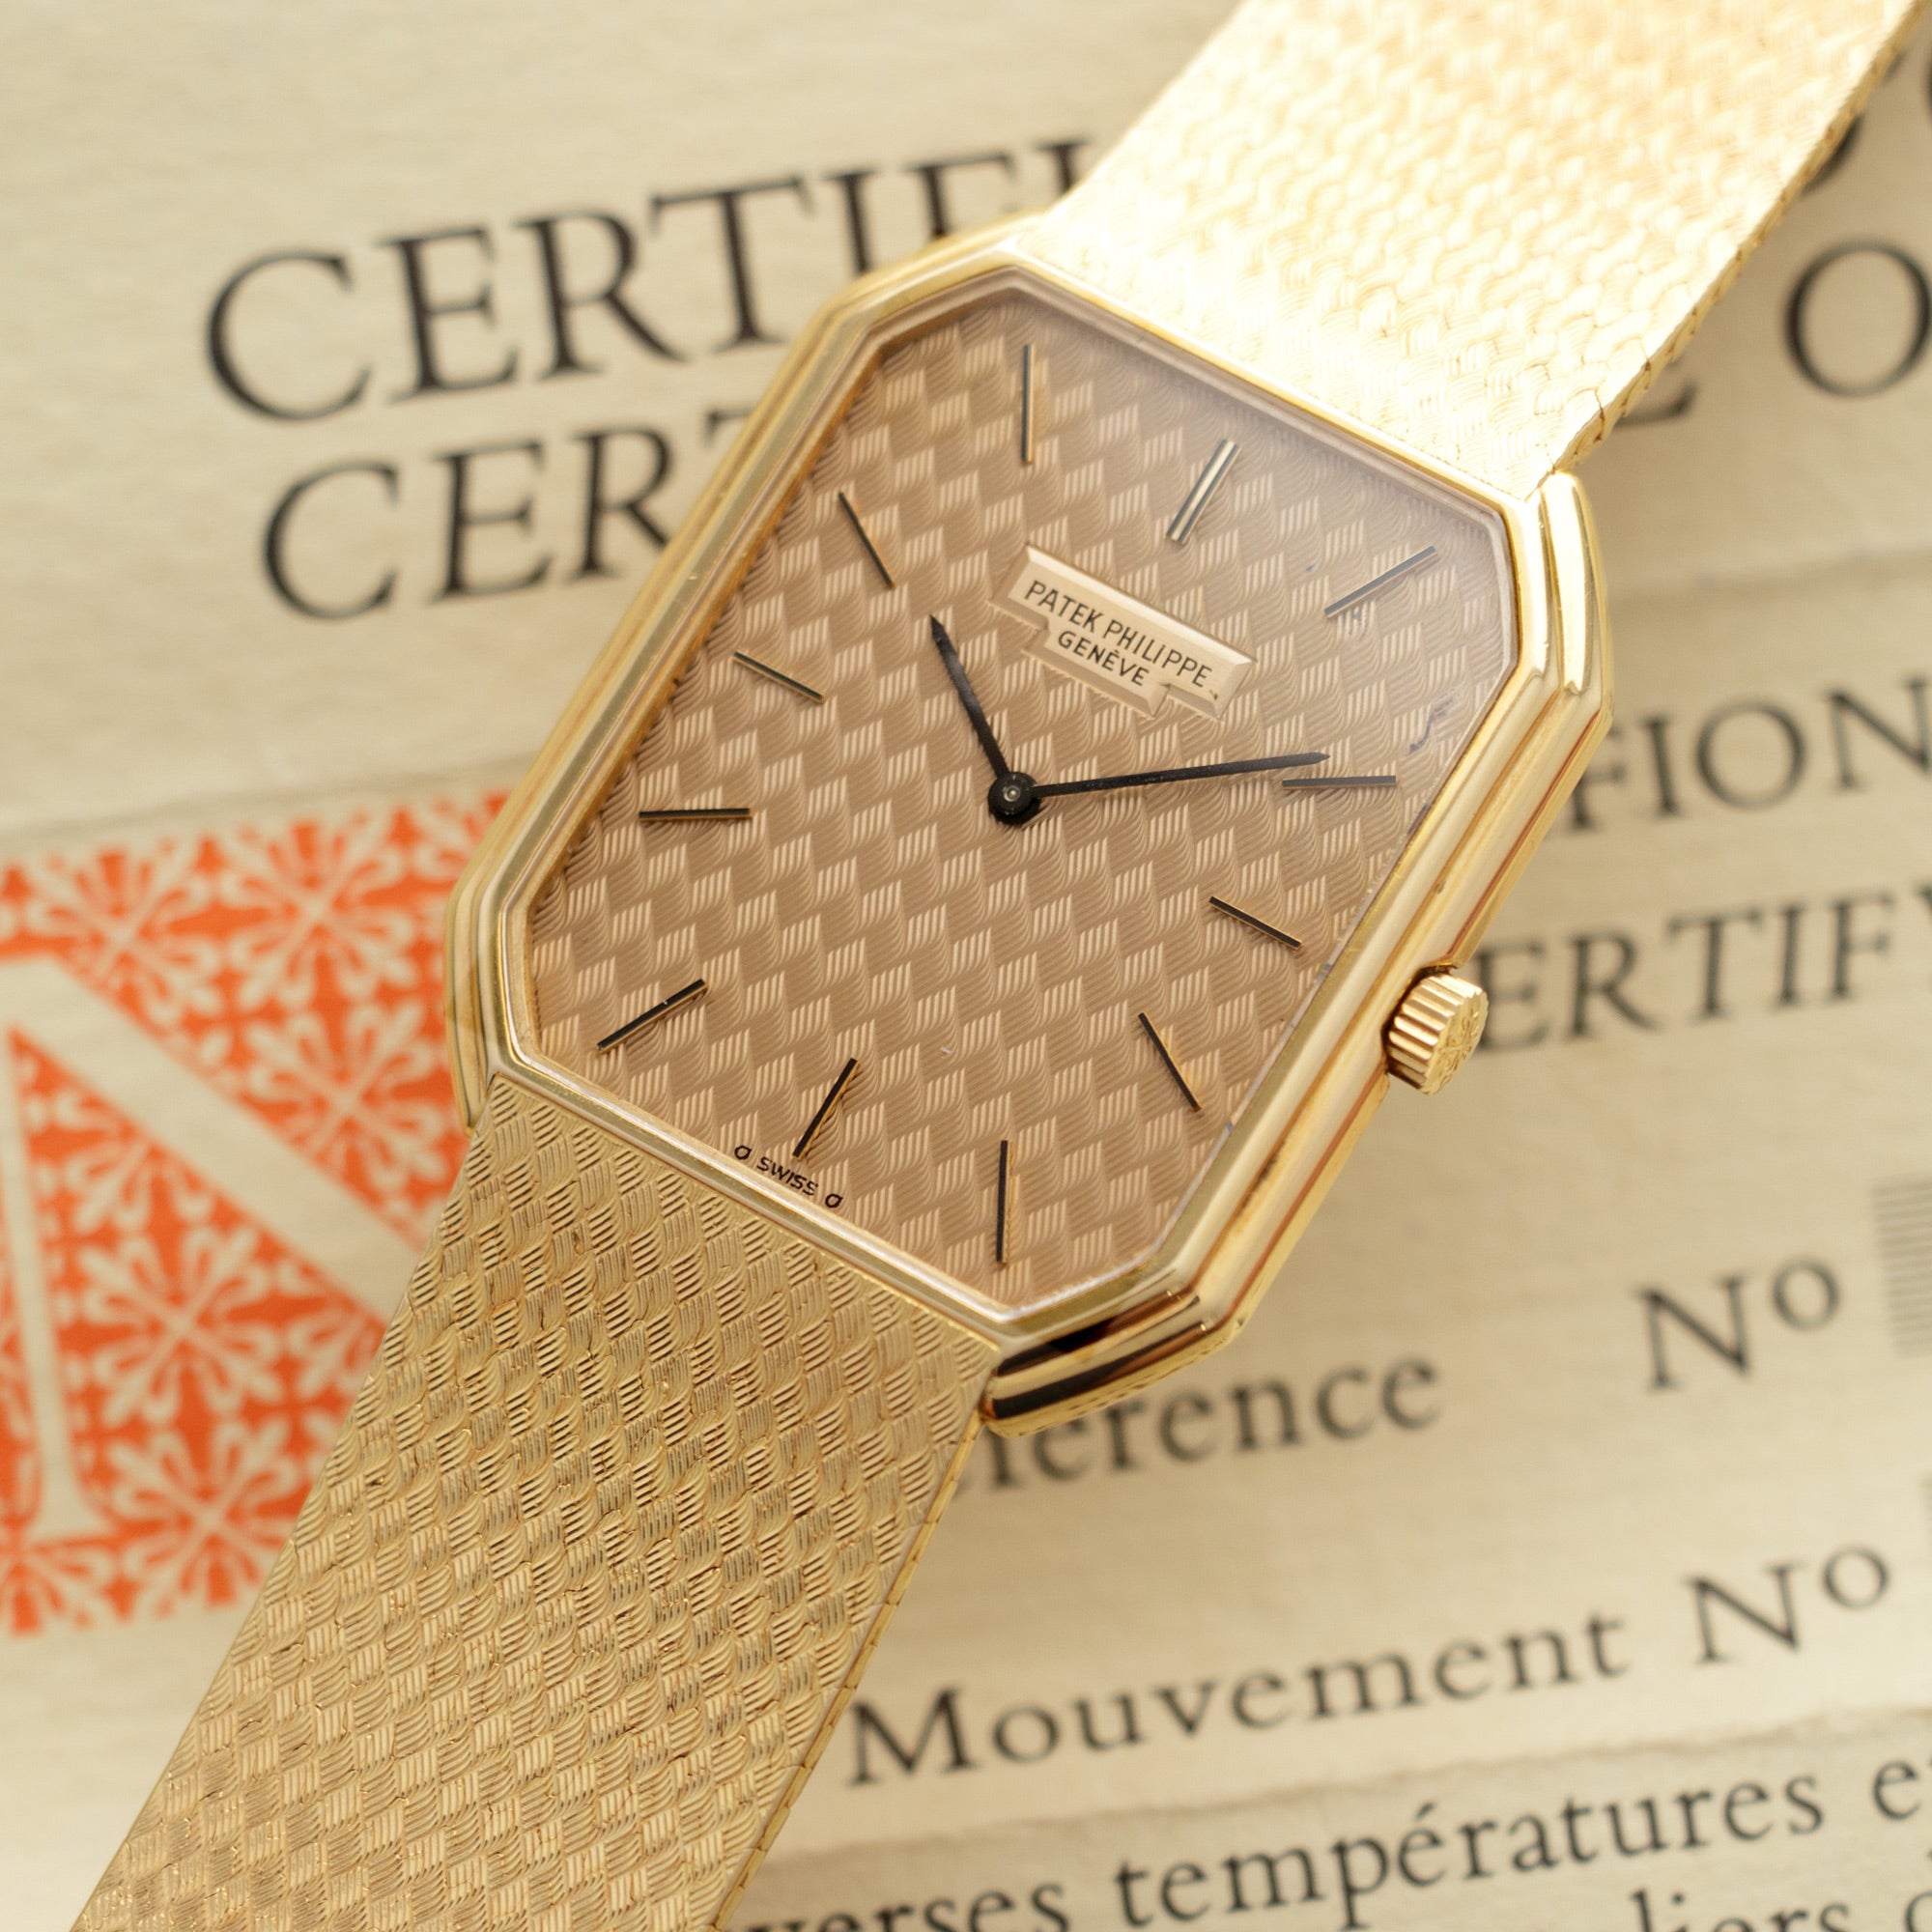 Patek Philippe - Patek Philippe Yellow Gold Bracelet Watch Ref. 3860 with Box and Papers - The Keystone Watches